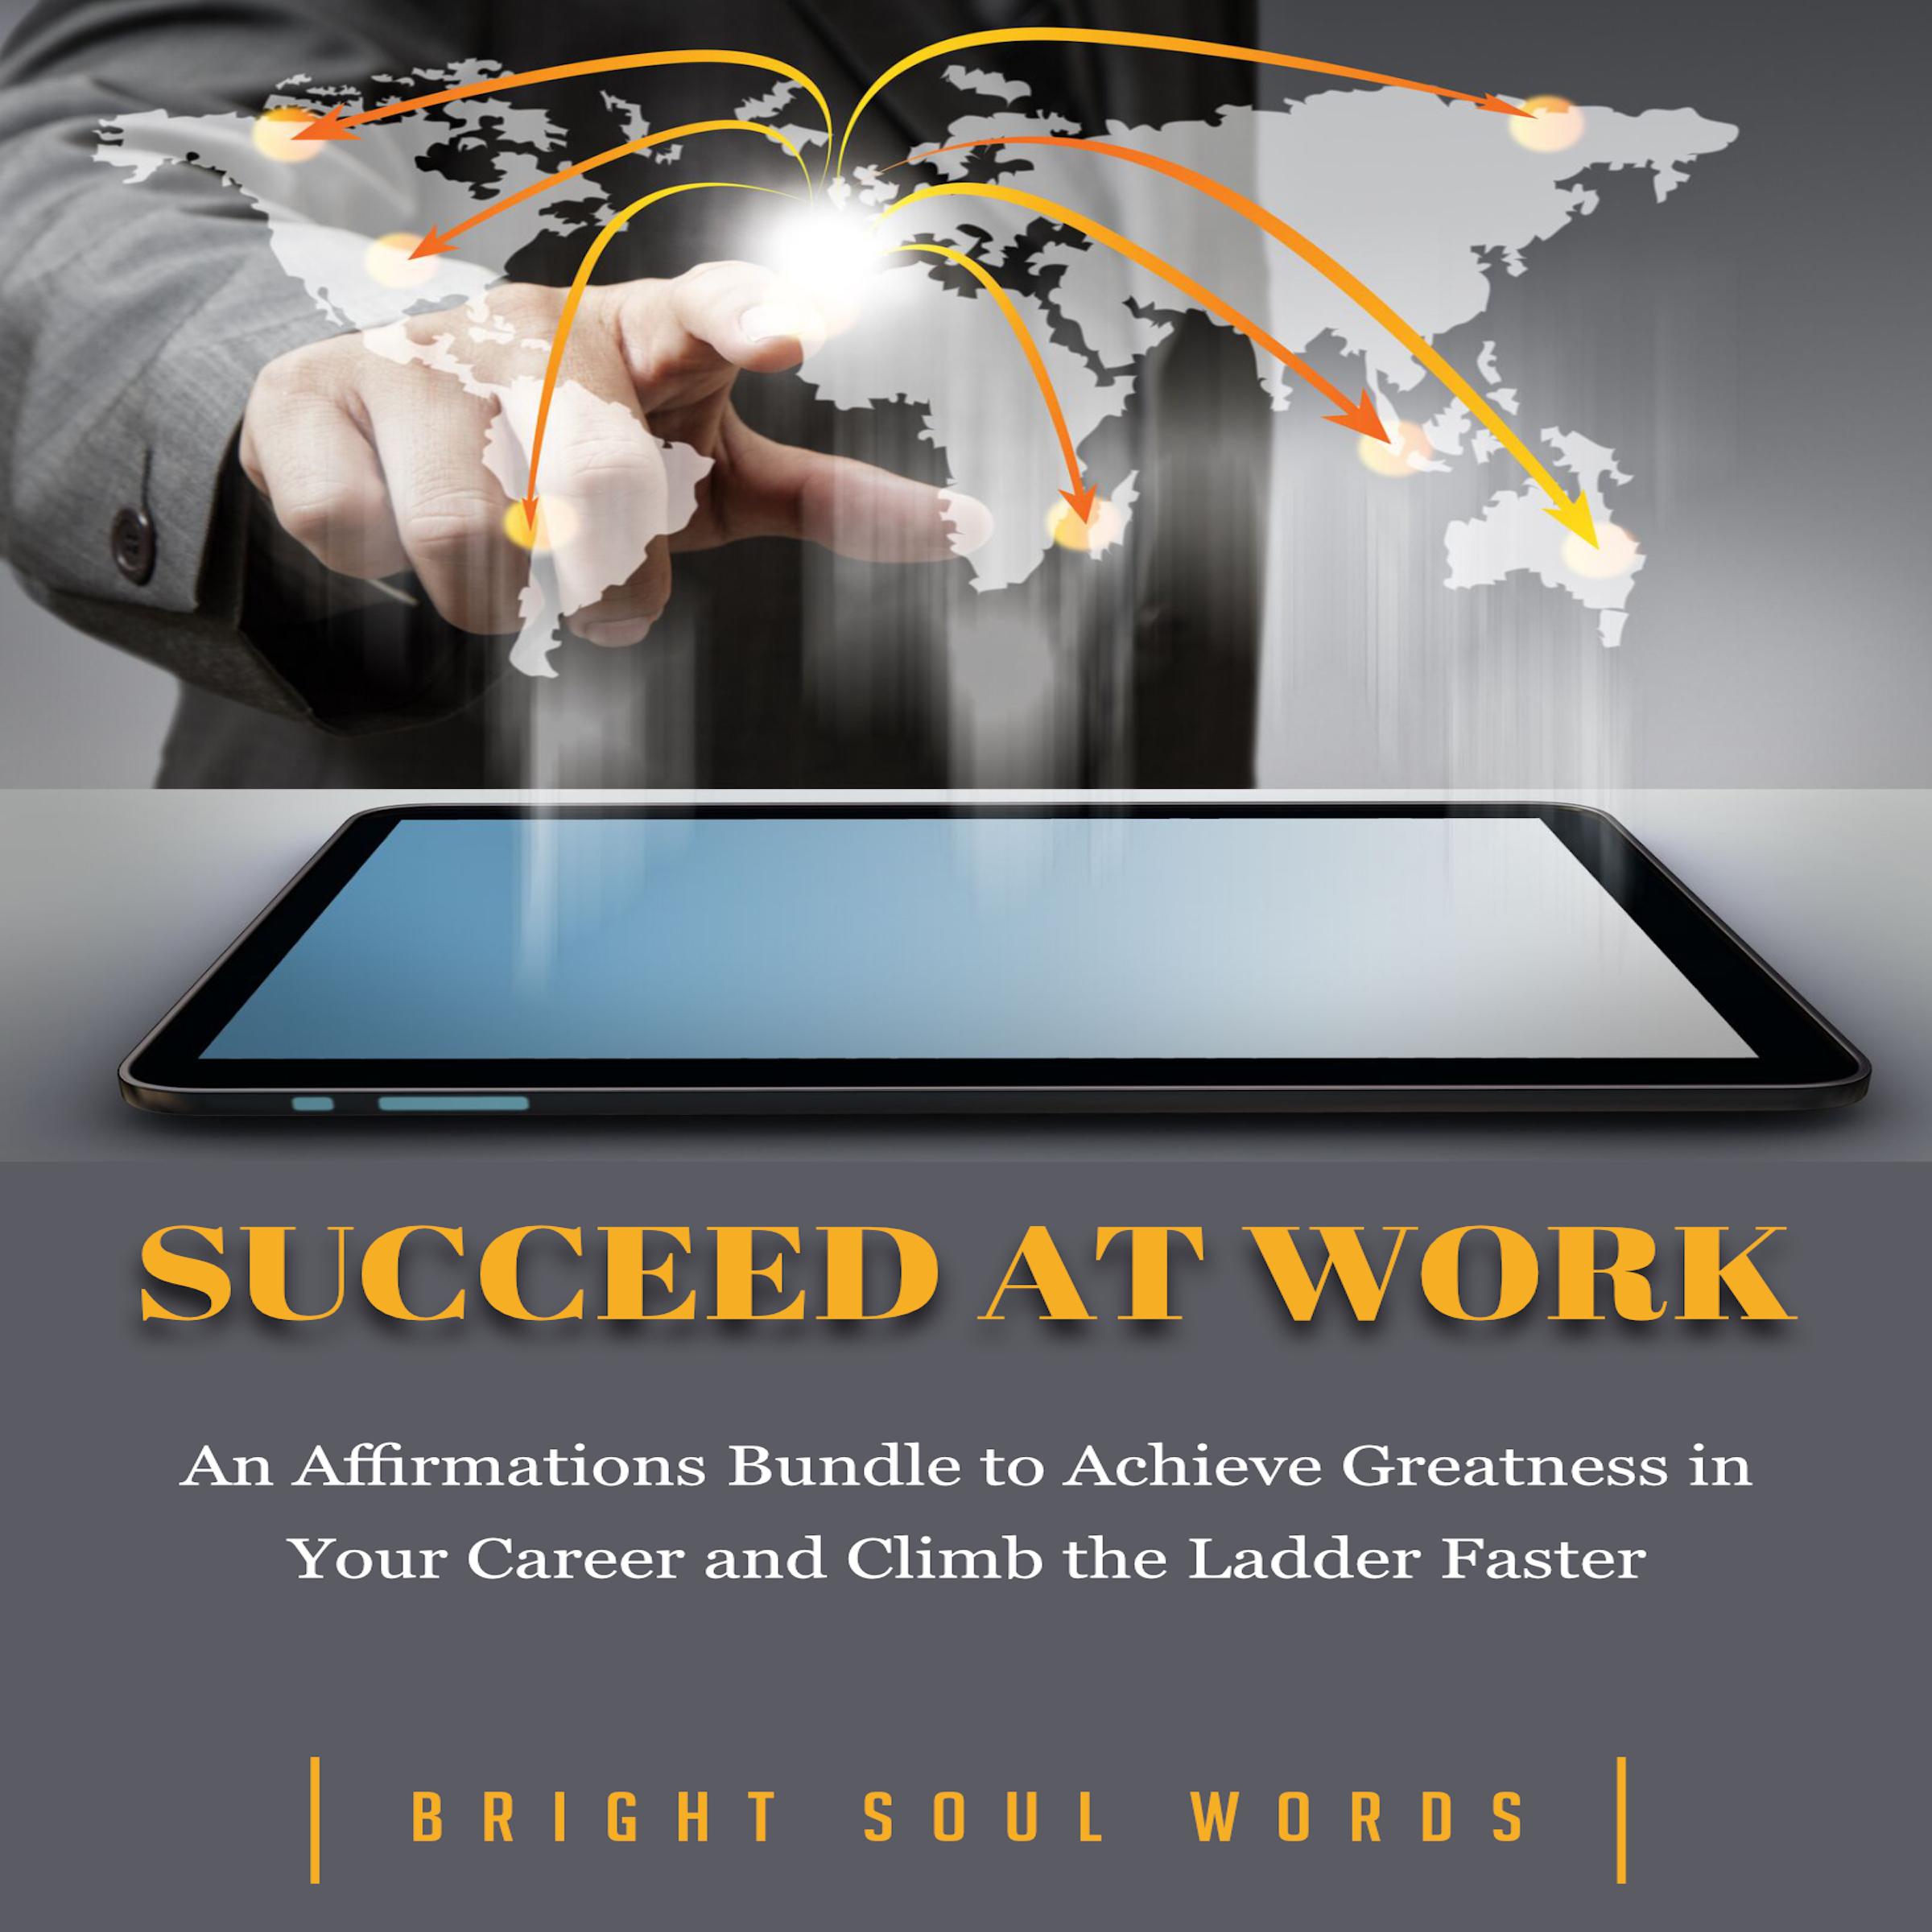 Succeed at Work: An Affirmations Bundle to Achieve Greatness in Your Career and Climb the Ladder Faster